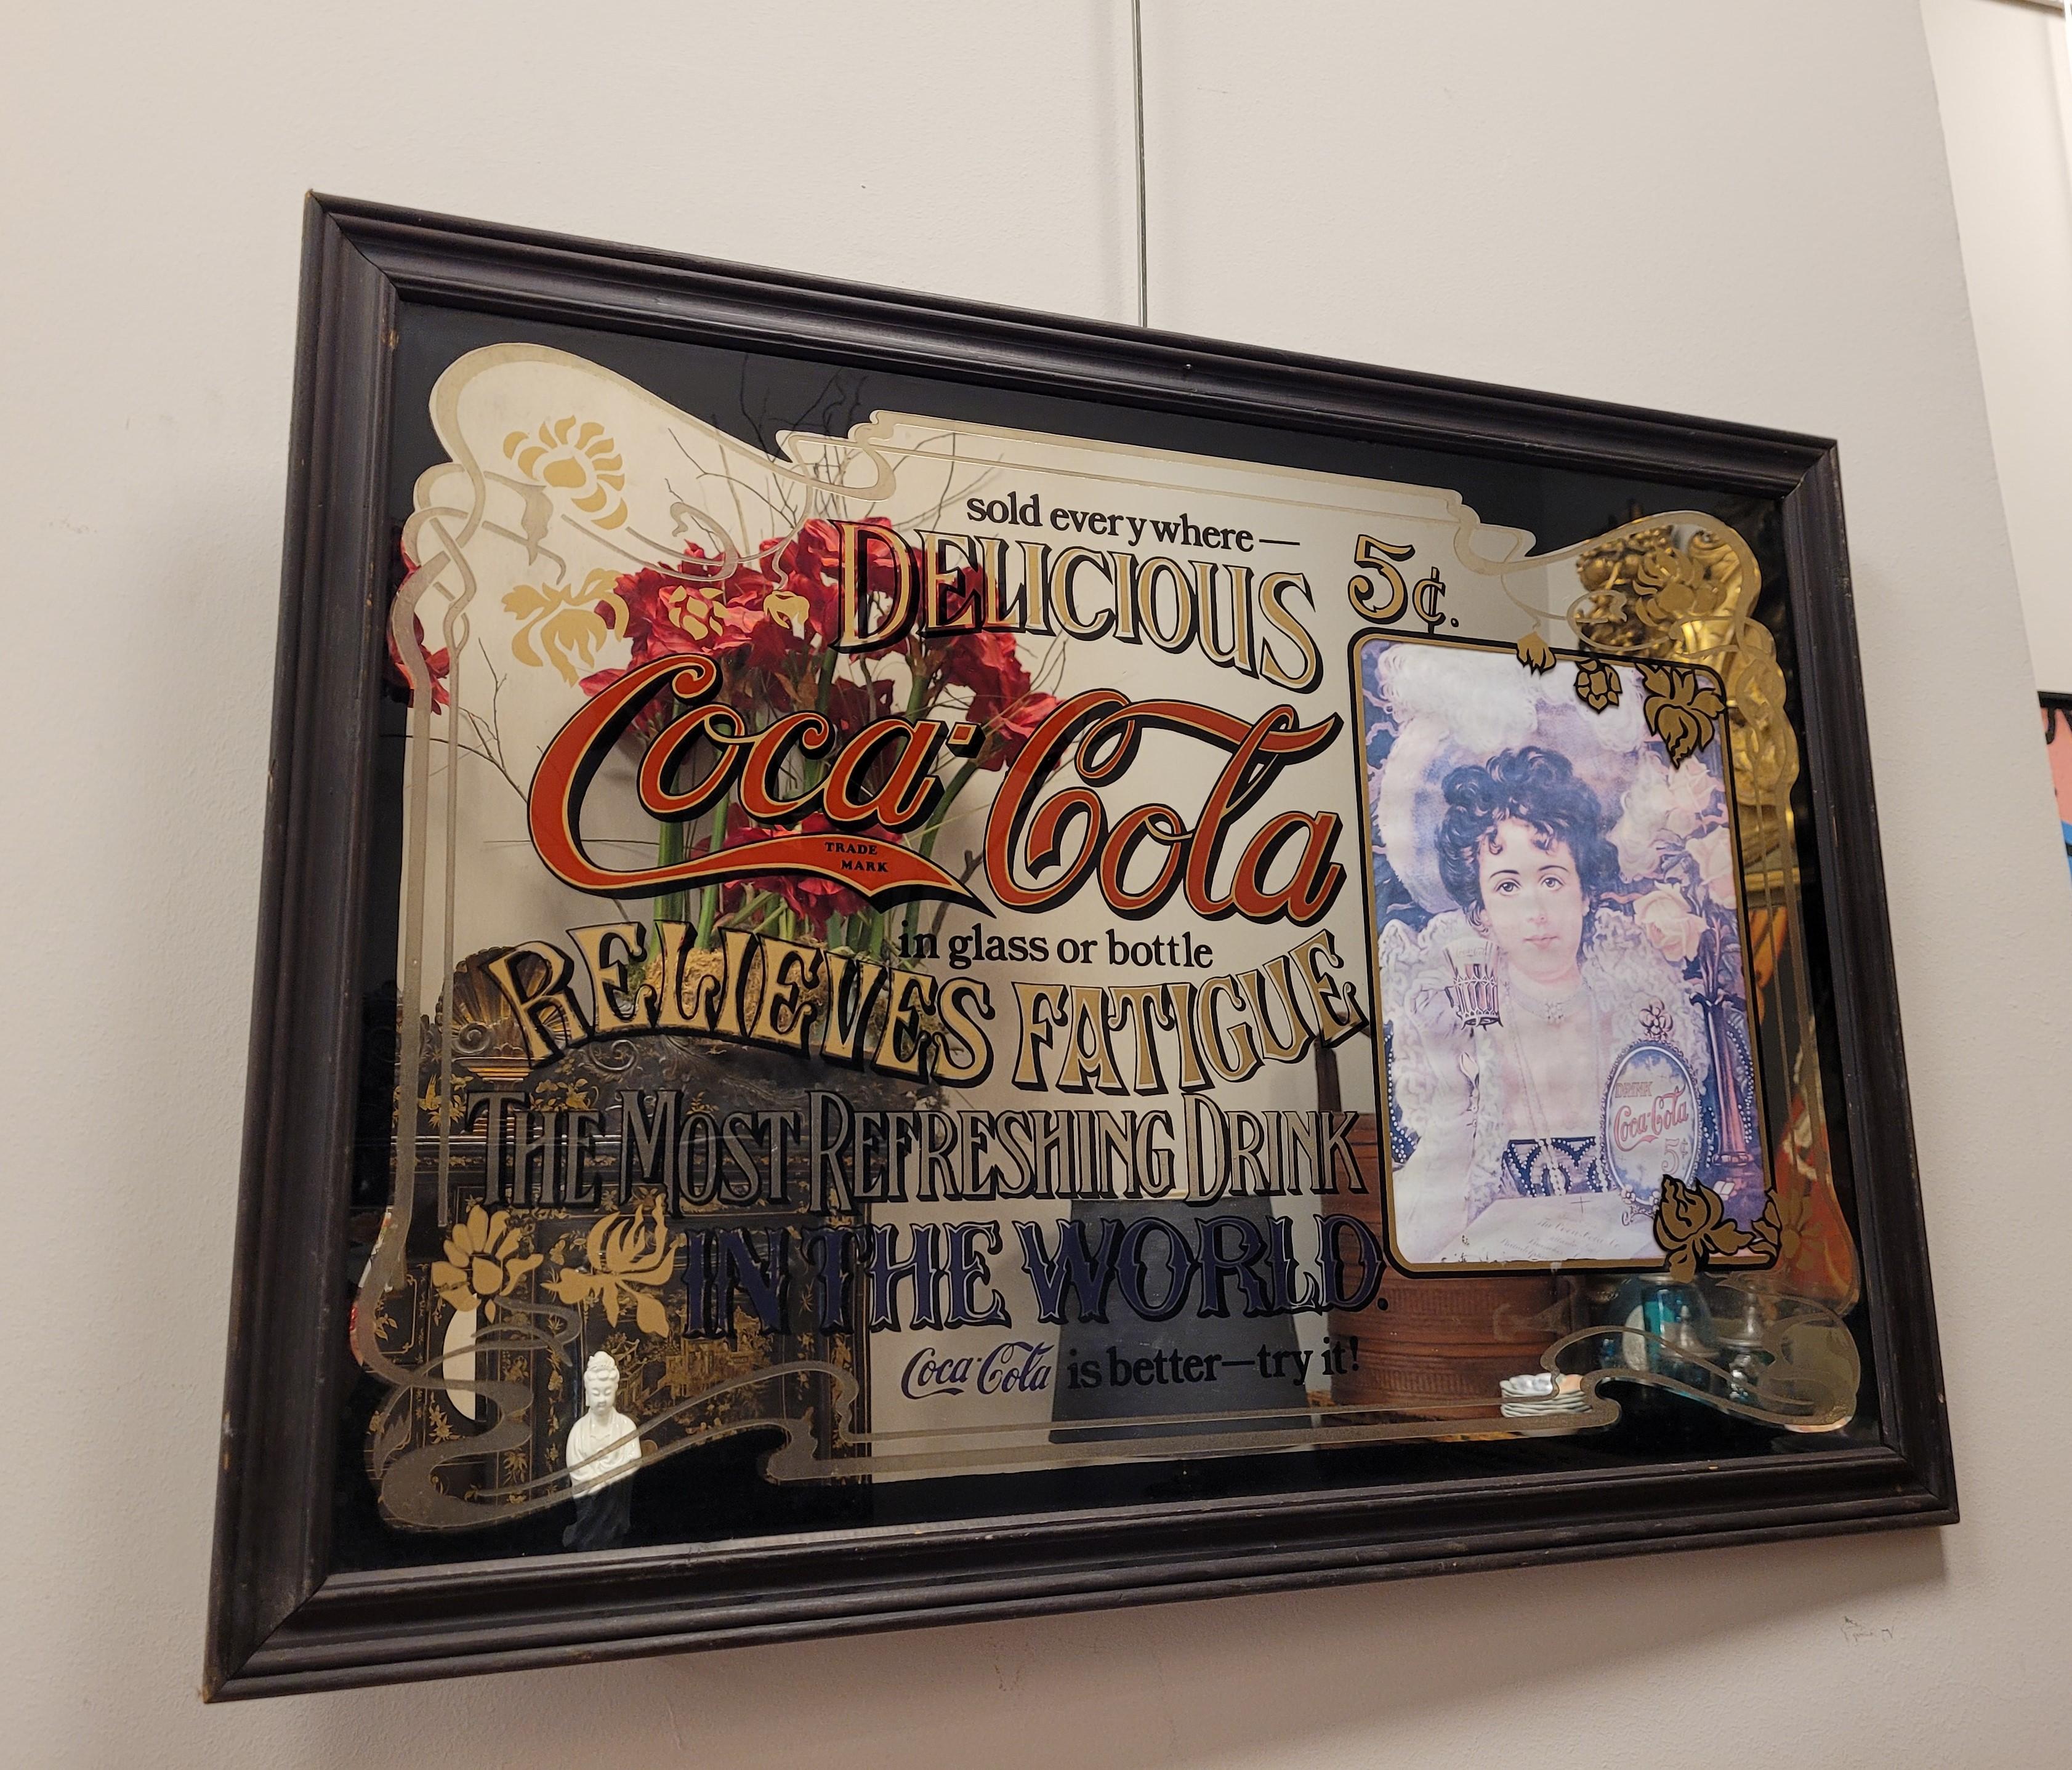 A silk-screened mirror painting of Coca-Cola. With a retro advertising style from the 1920s. The advertising of the time said 